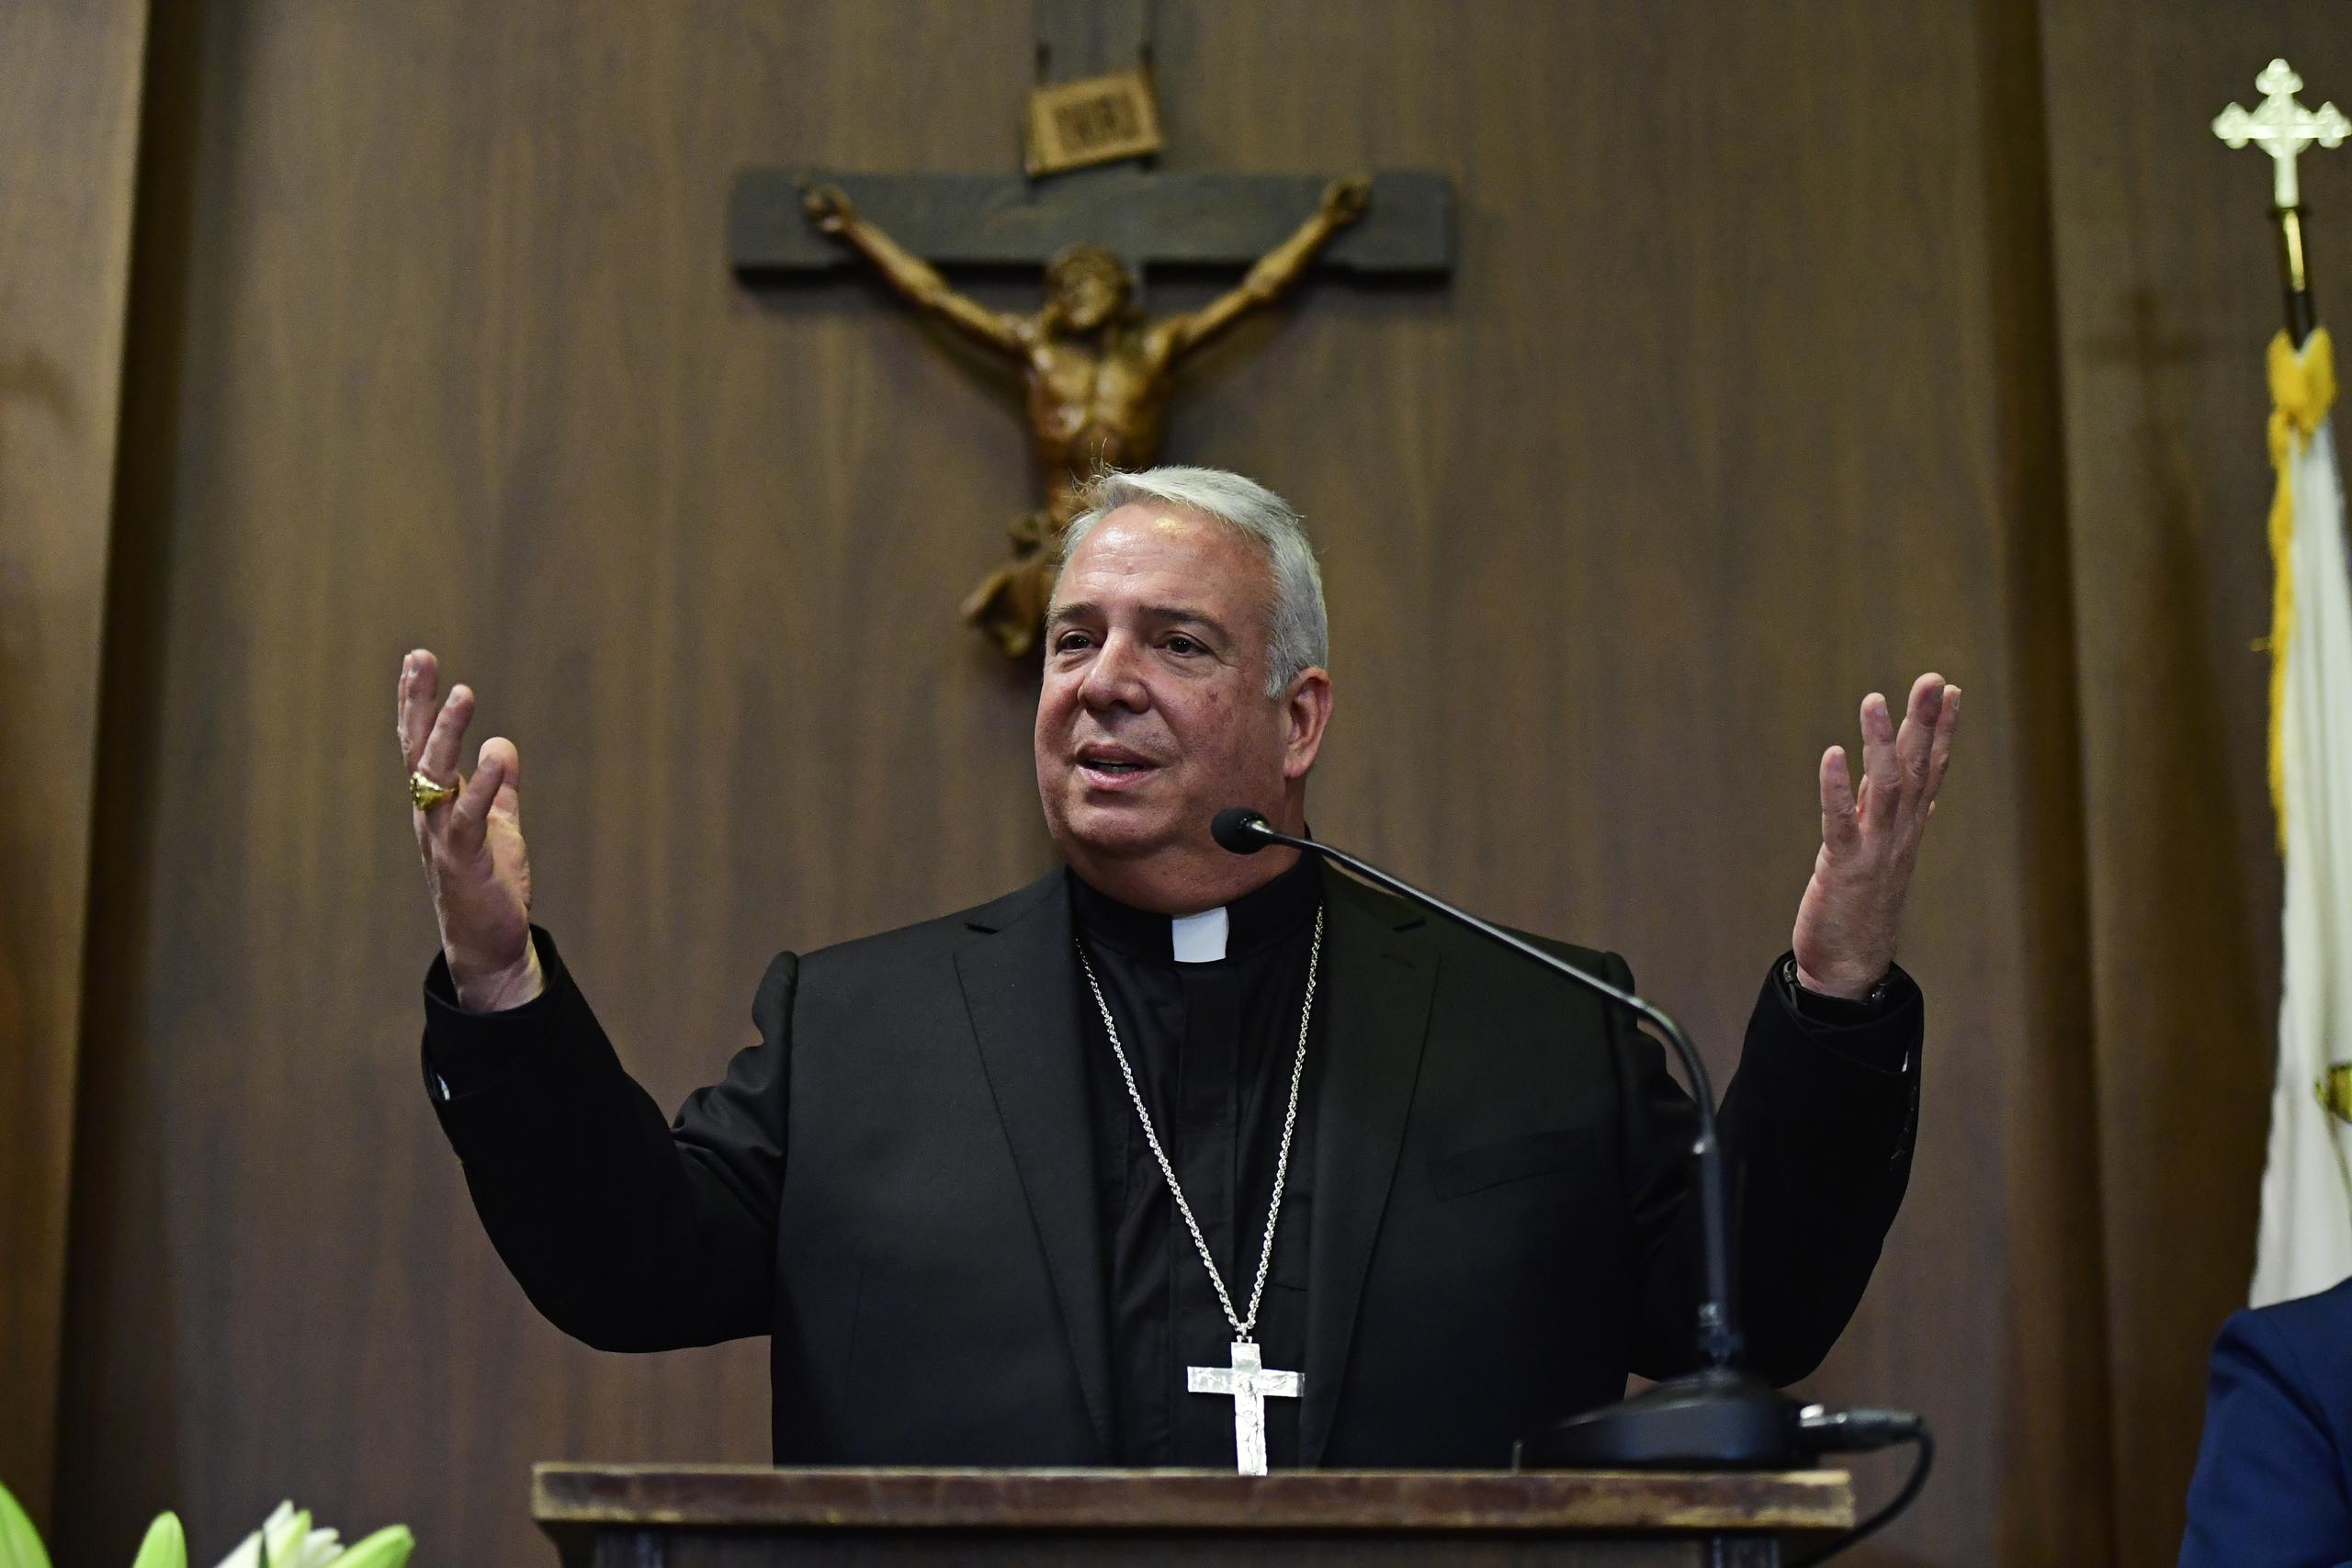 Archbishop Elect Nelson Perez speaks during a news conference, Thursday, Jan. 23, 2020, at the Archdiocesan Pastoral Center in Philadelphia. Cleveland Bishop Nelson Perez was introduced as the new leader of the Archdiocese of Philadelphia, making him the first Hispanic archbishop to lead the region's 1.3 million-member flock. (AP Photo/Corey Perrine)